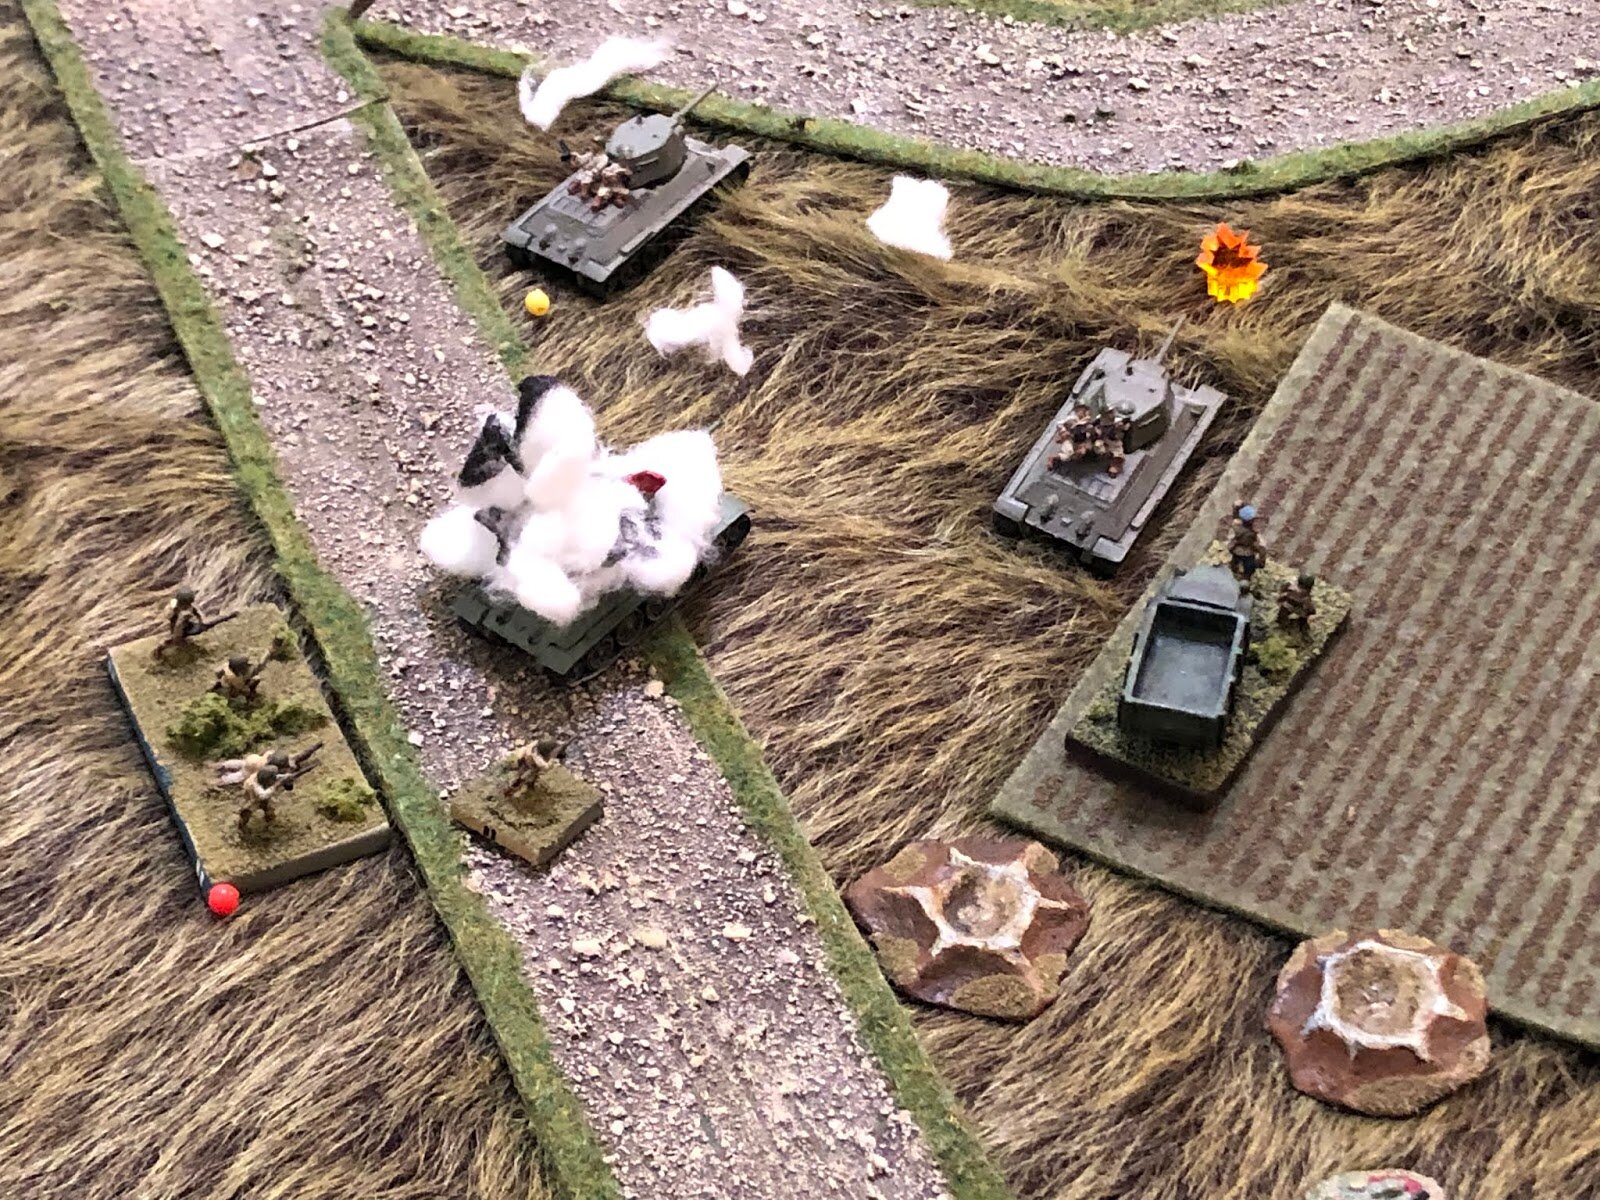  In the Soviet center, the 2nd Tank Rider Platoon commander rallies his suppressed squad (far left), but the riders at top left continue taking fire and now they're suppressed! 